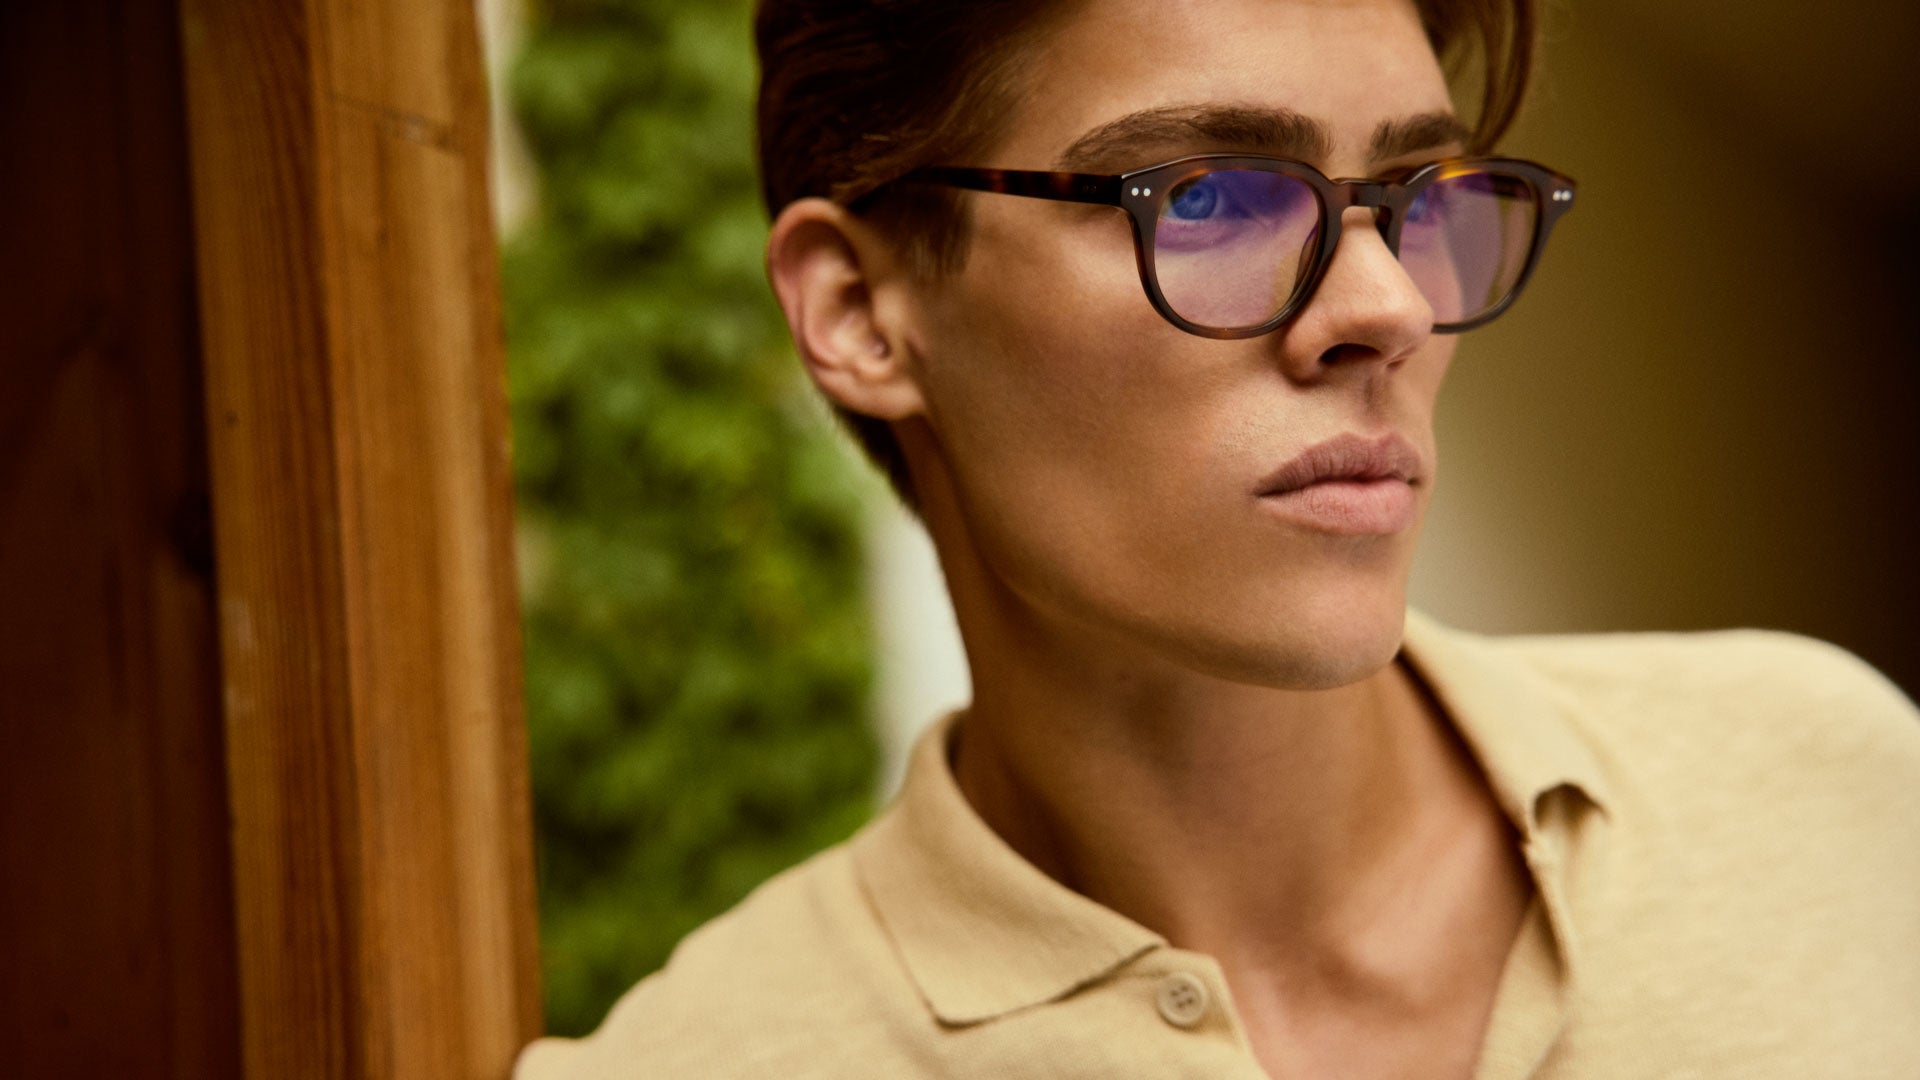 Model is wearing Acero Chaga blue light computer glasses to reduce eye strain and prevent headaches